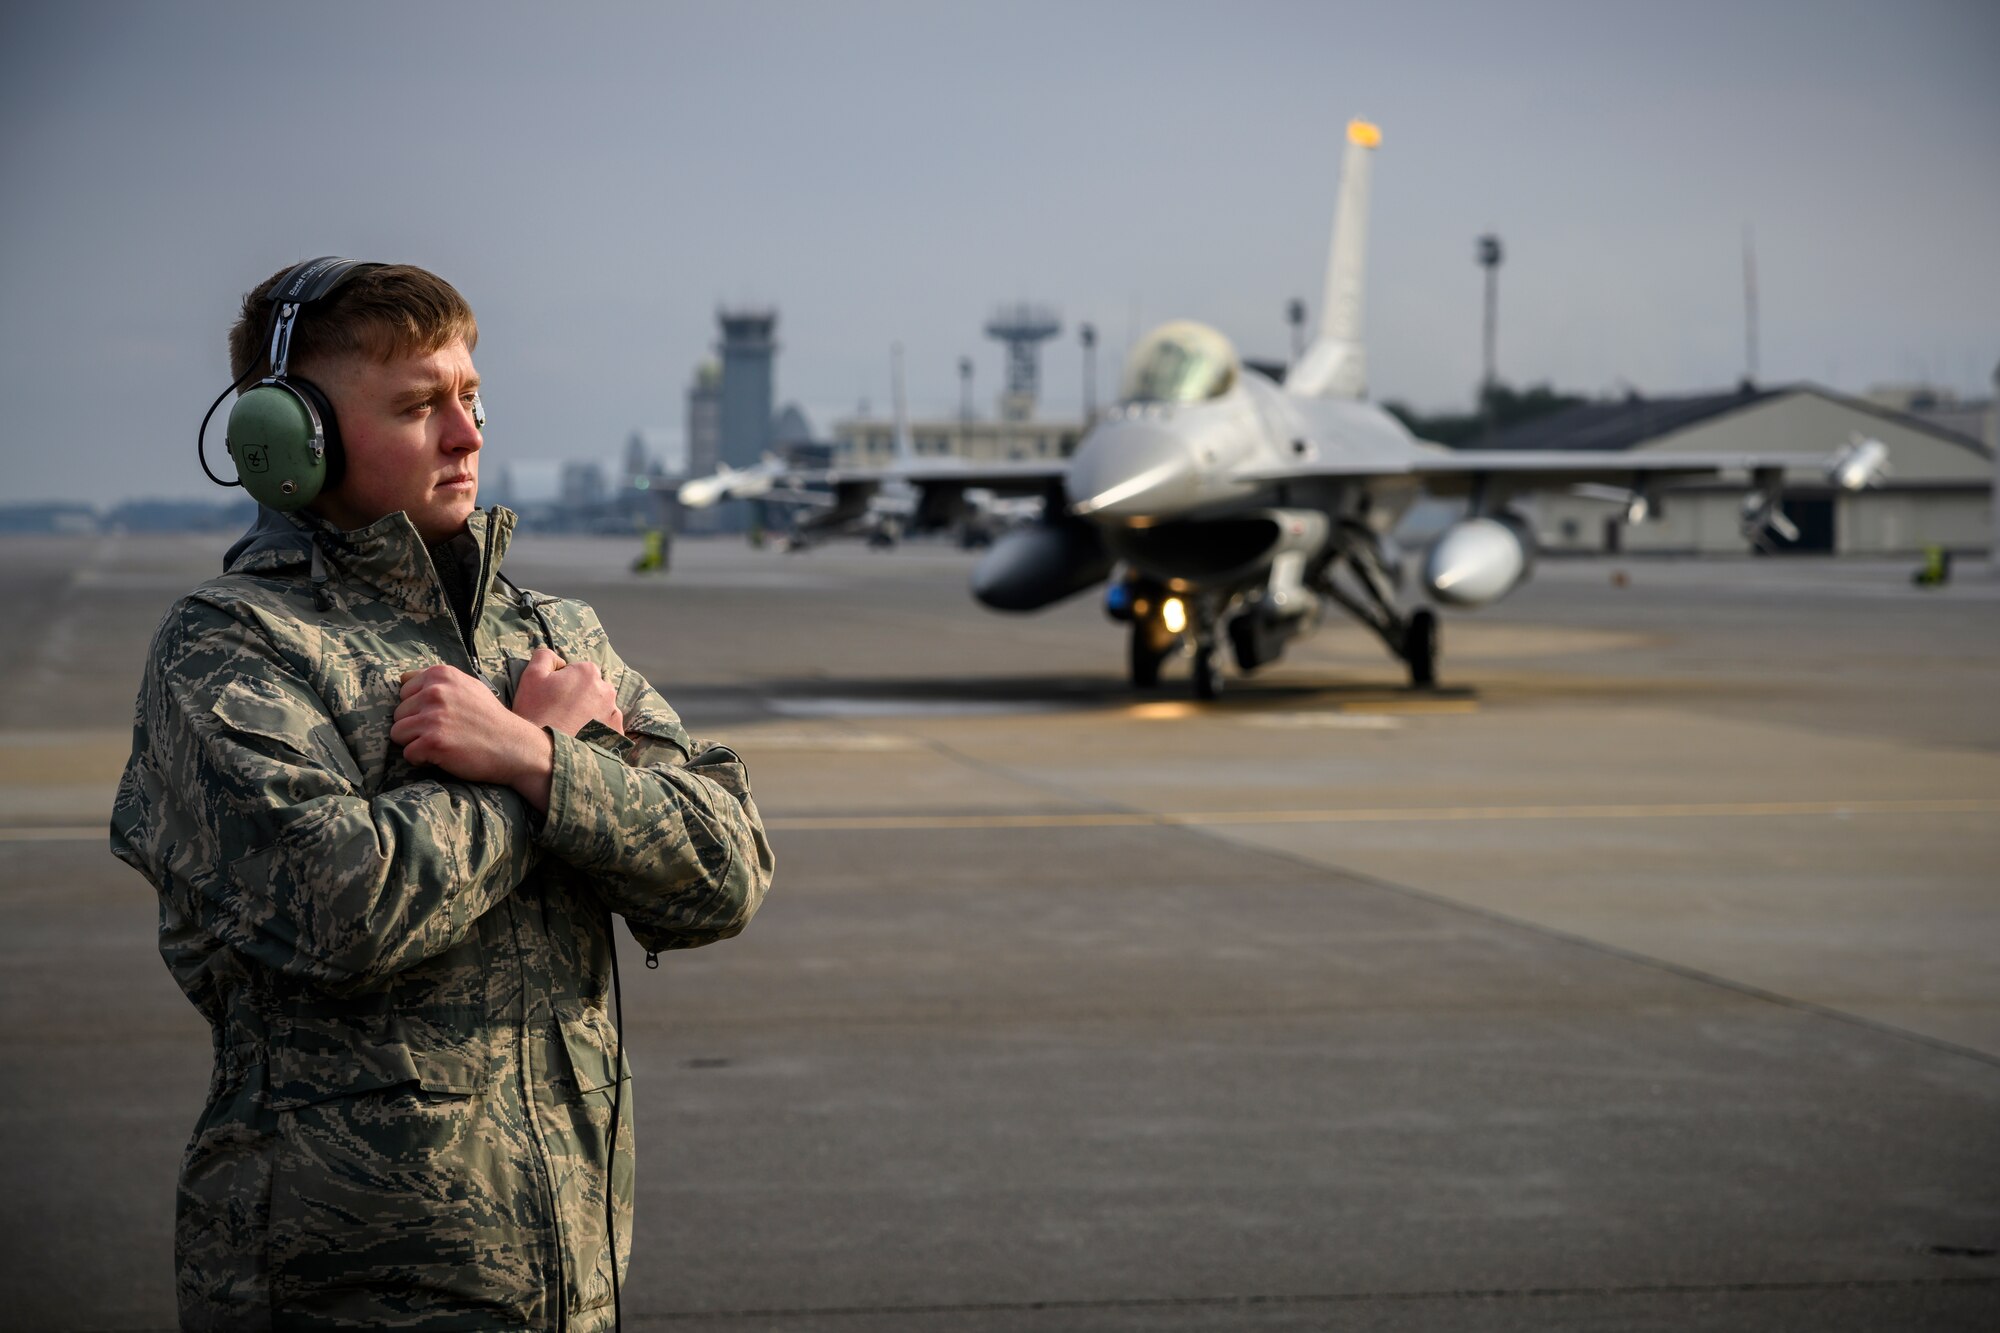 U.S. Air Force Airman Corey Tidwell, a 35th LRS fuels distribution journeyman, prepares to marshal an F-16 Fighting Falcon during Agile Combat Employment week at Misawa Air Base, Japan, Dec. 10, 2020. The 35th LRS tested a new cargo deployment function (CDF) process that centralized representatives from all units and their unpacked cargo in one location to collectively pack individual storage units, reducing the CDF timeline and deployment footprint. (U.S. Air Force photo by Airman 1st Class China M. Shock)